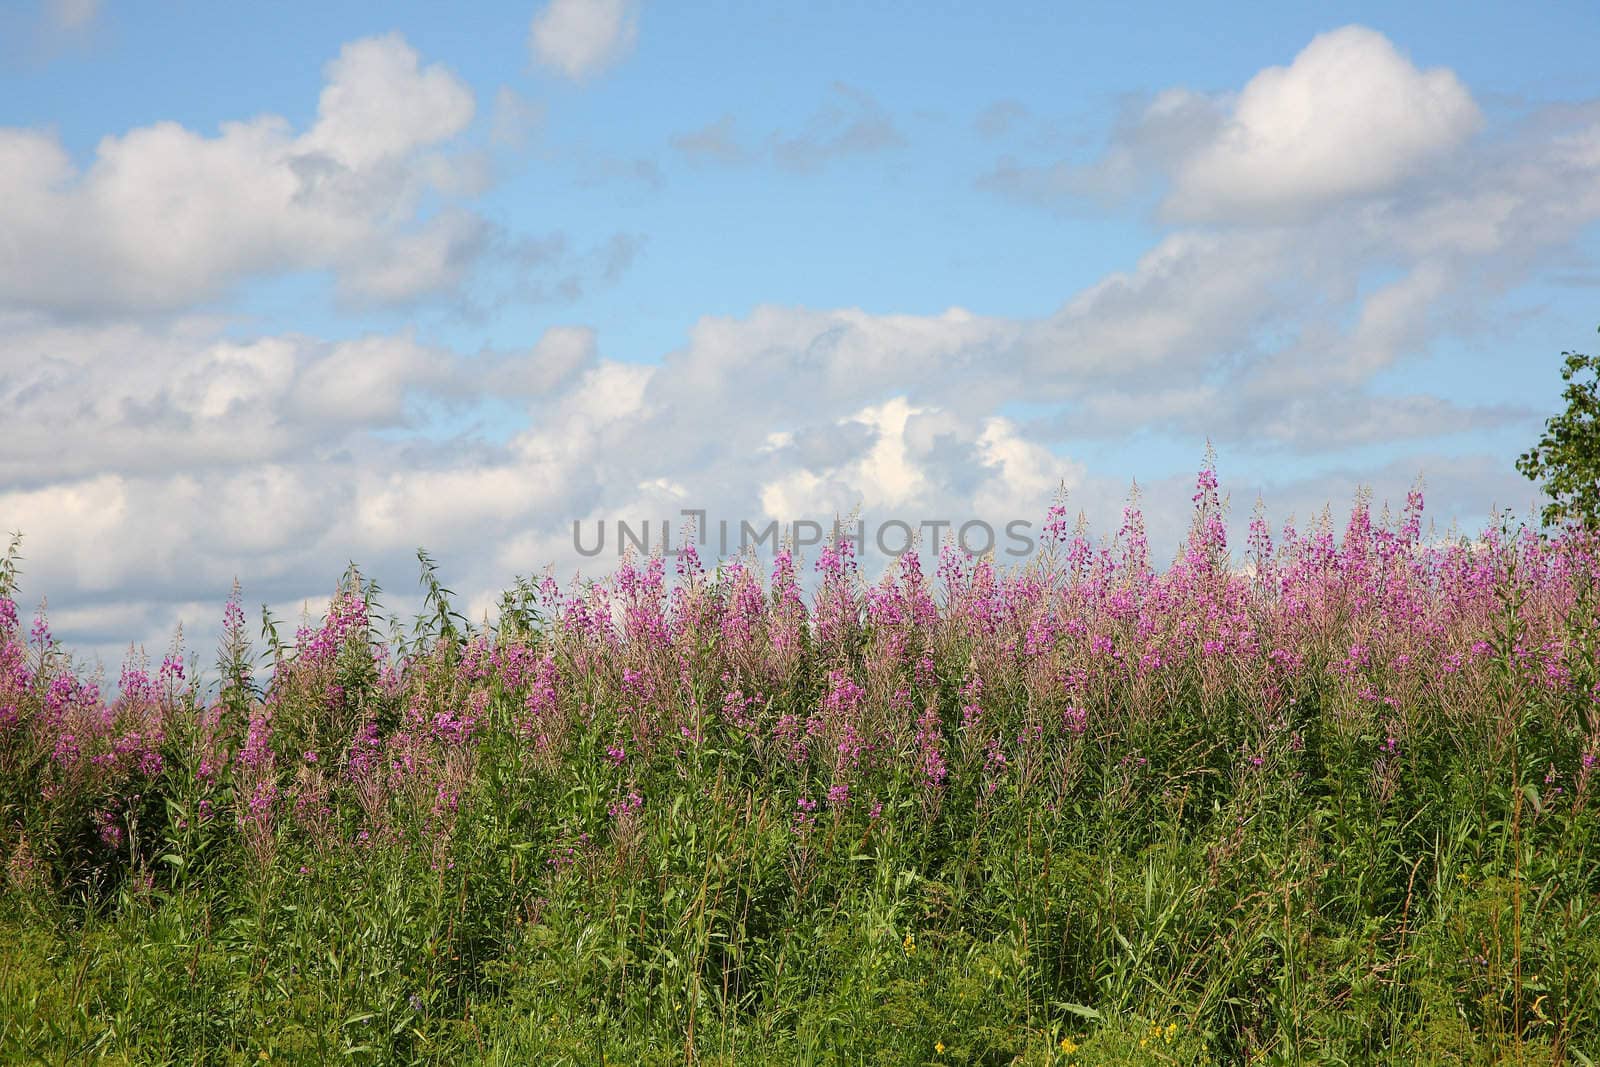 The landscape, willow-herb and clouds. Nature, year day